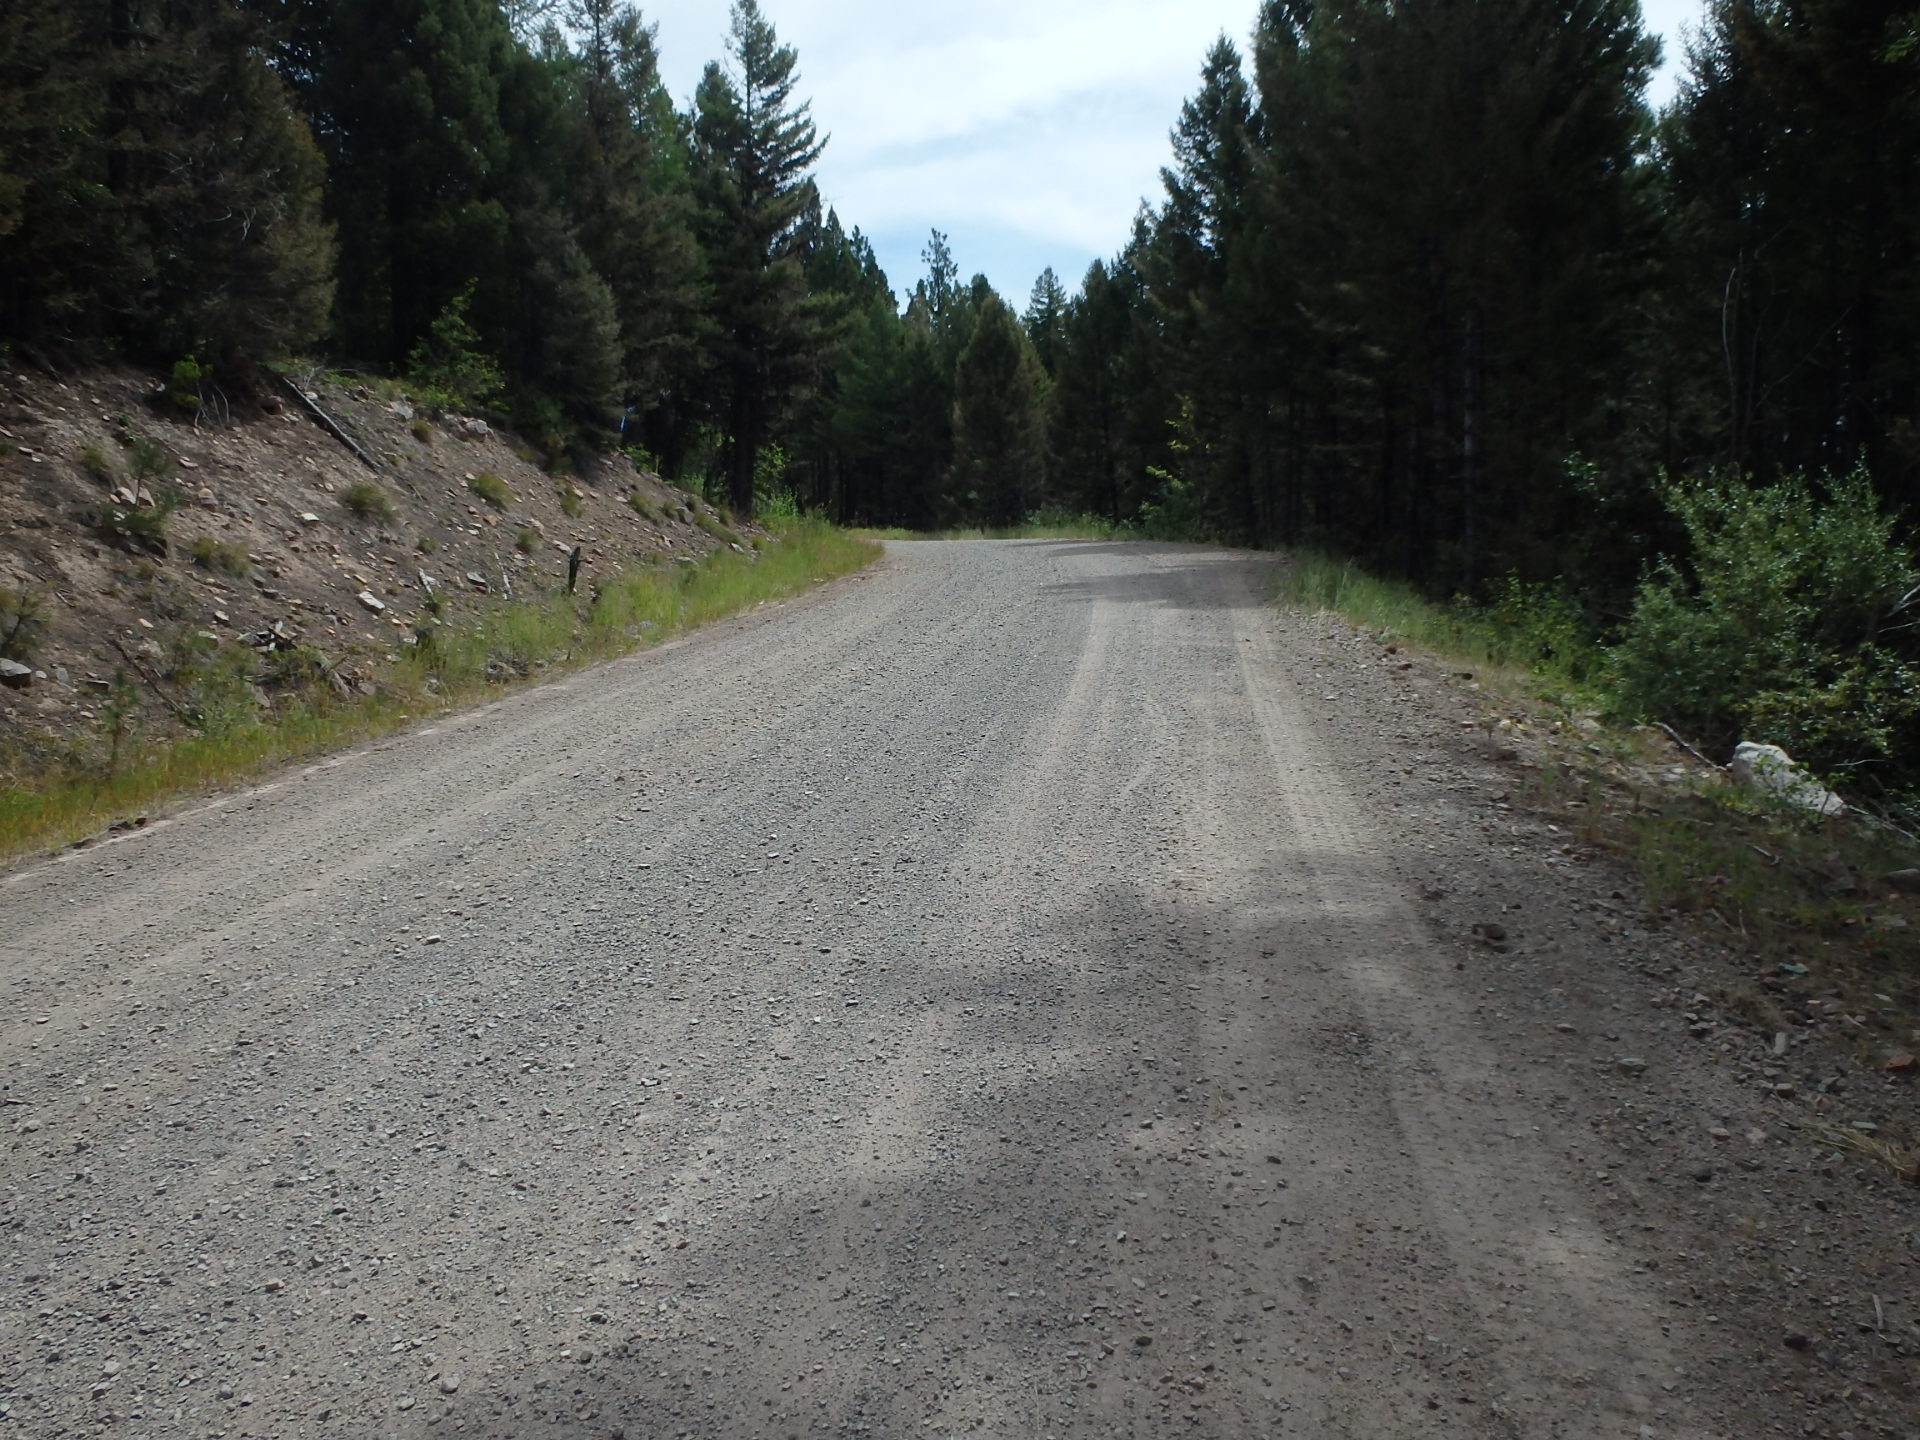 GDMBR: Heading down NF-477 to Ovando, MT.